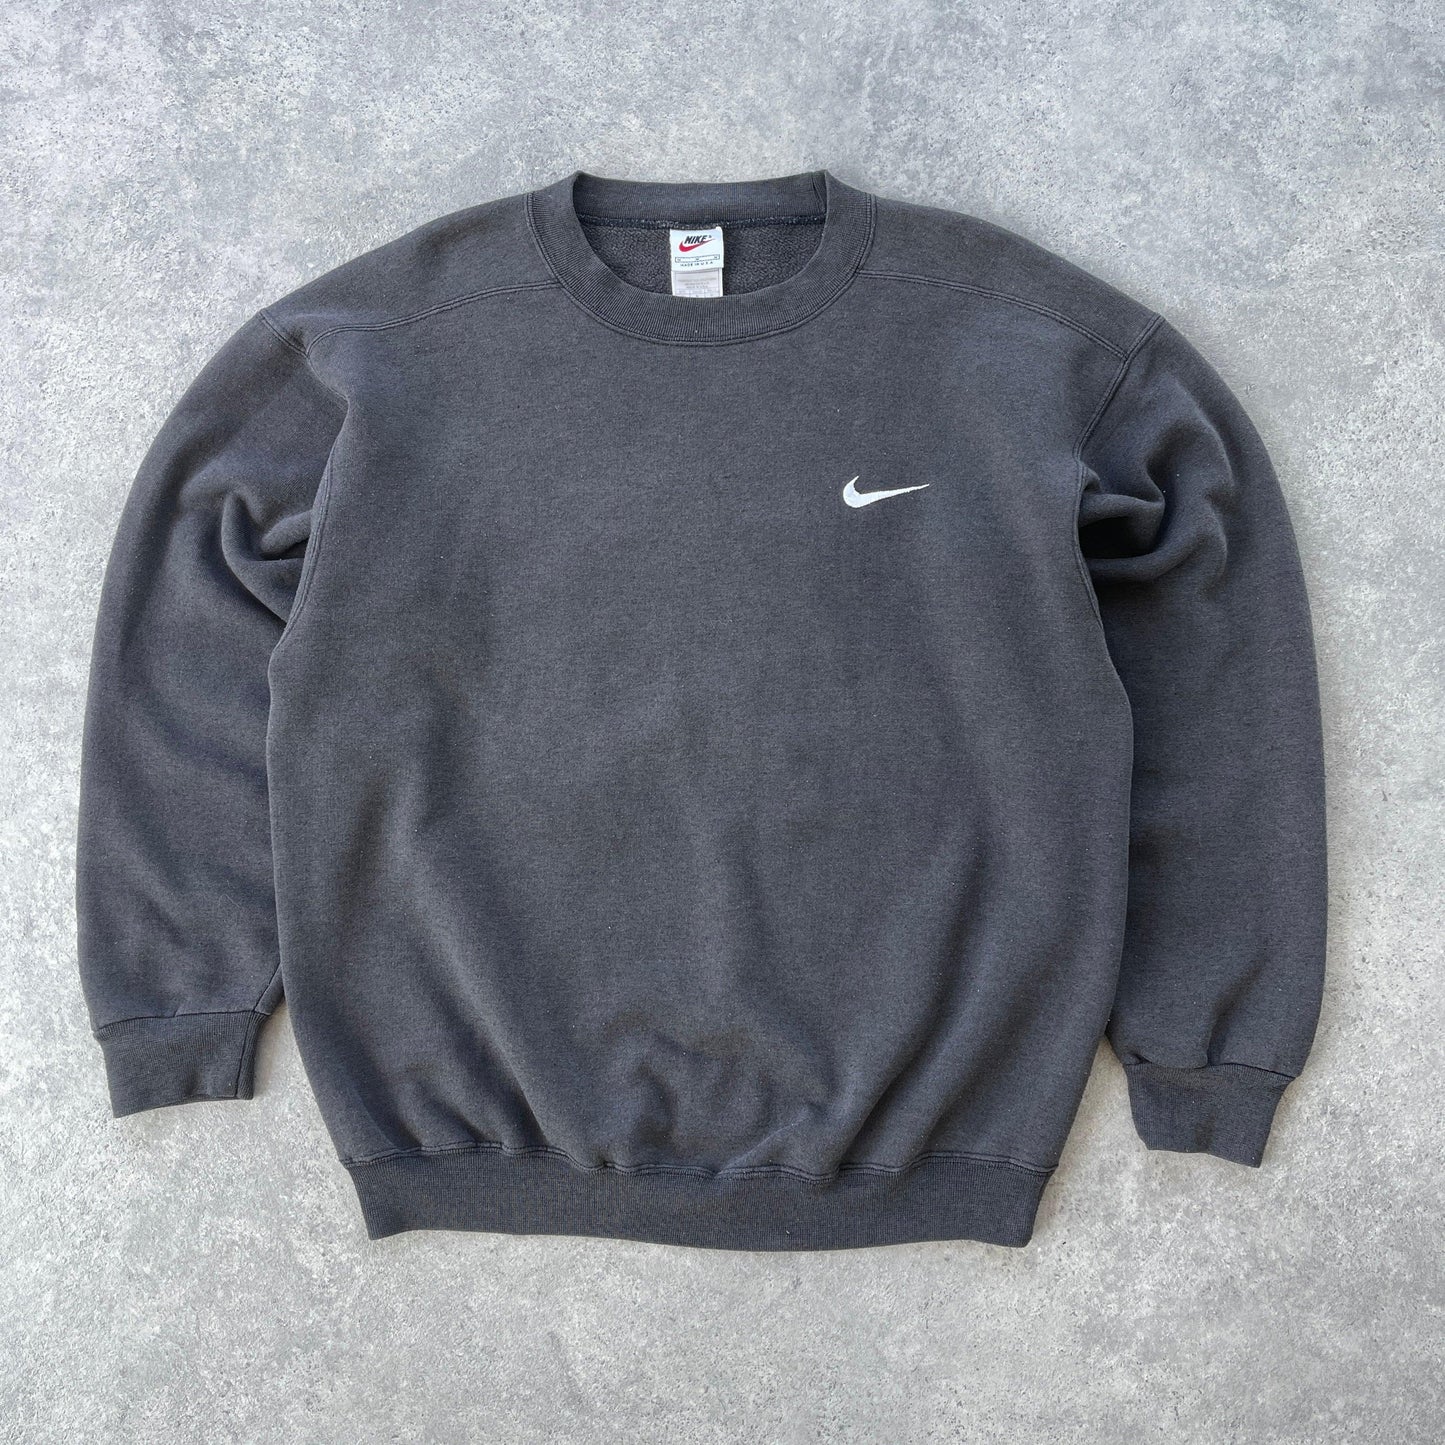 Nike 1990s embroidered heavyweight sweatshirt (M) - Known Source